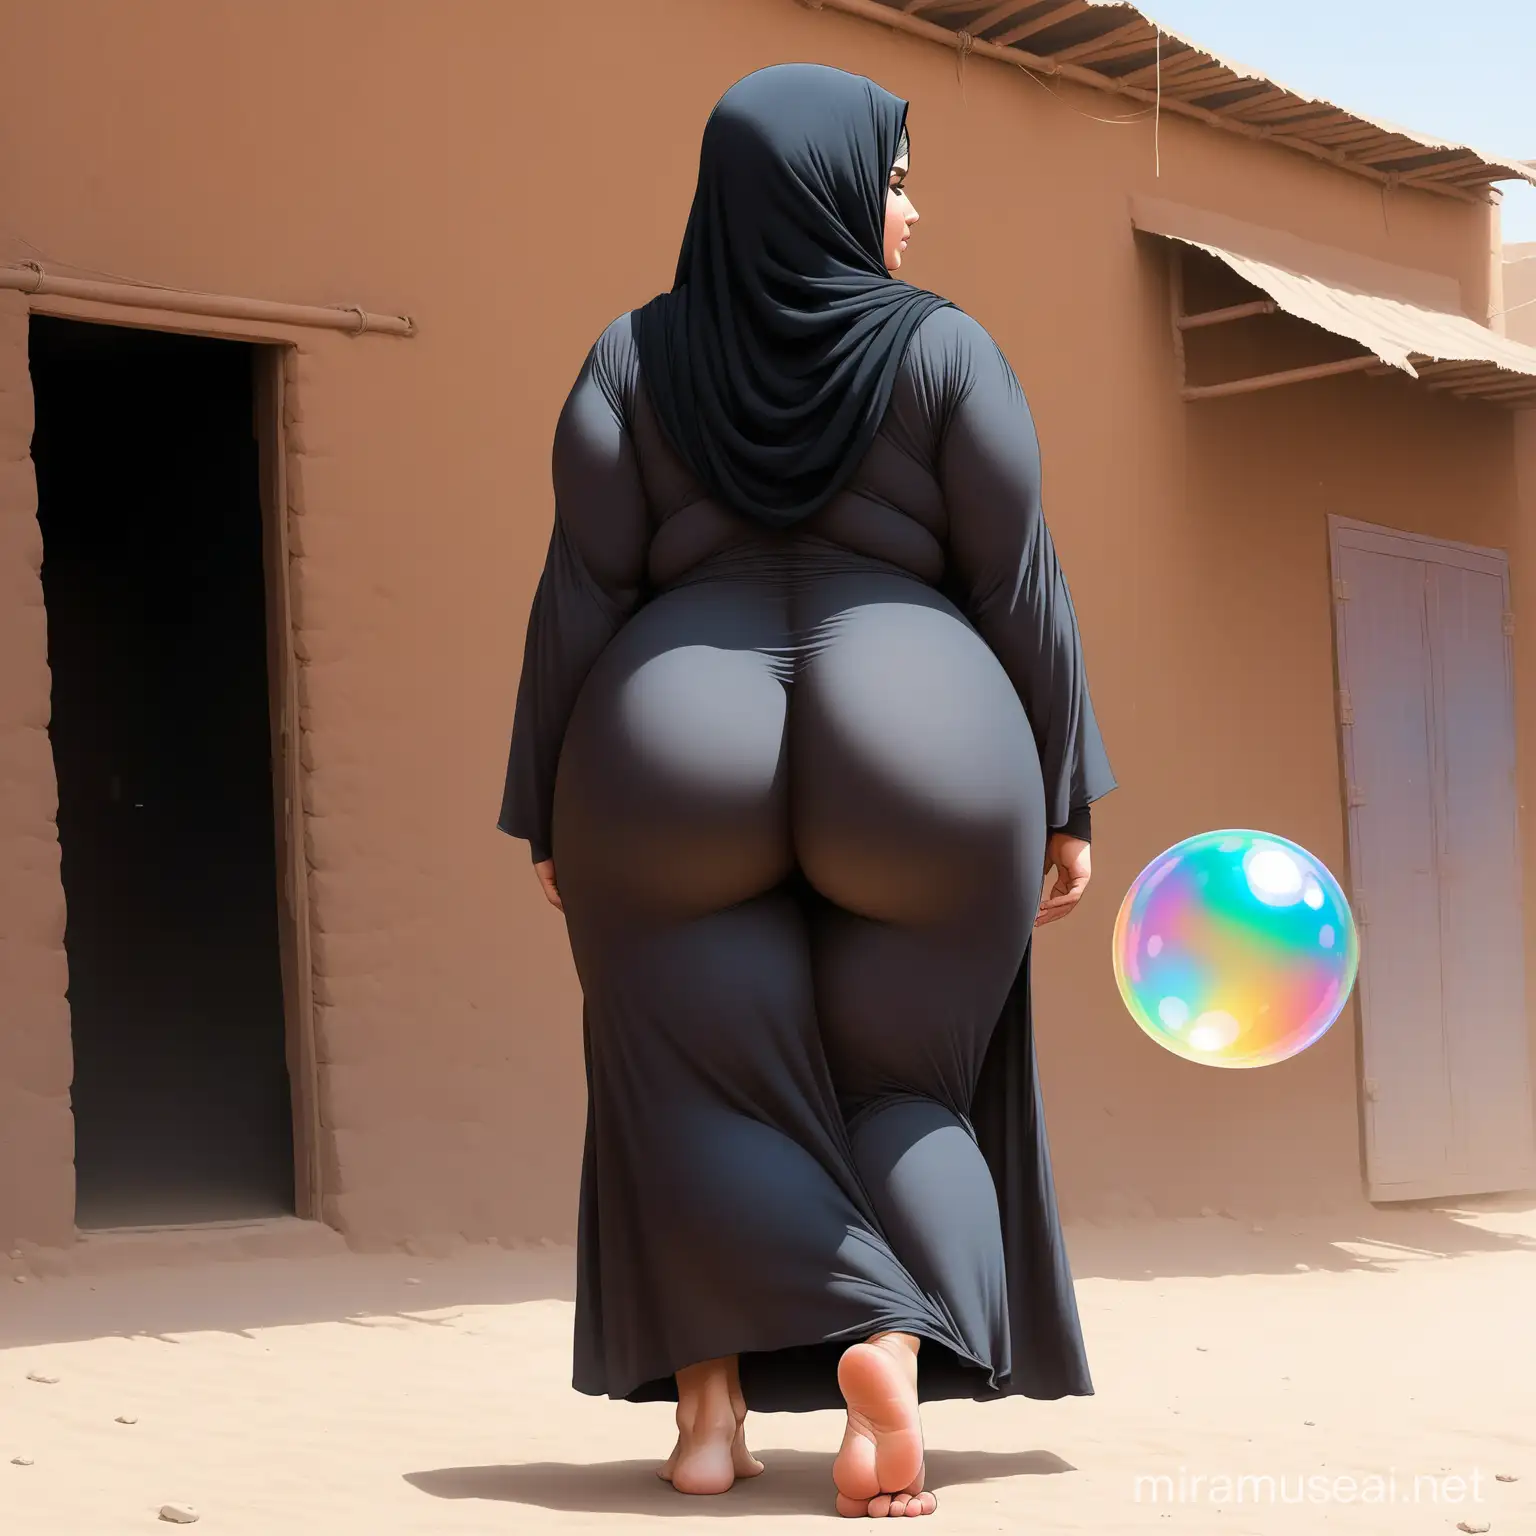 Colorful Afghan Woman with Large Bare Butt in Urban Slum Setting